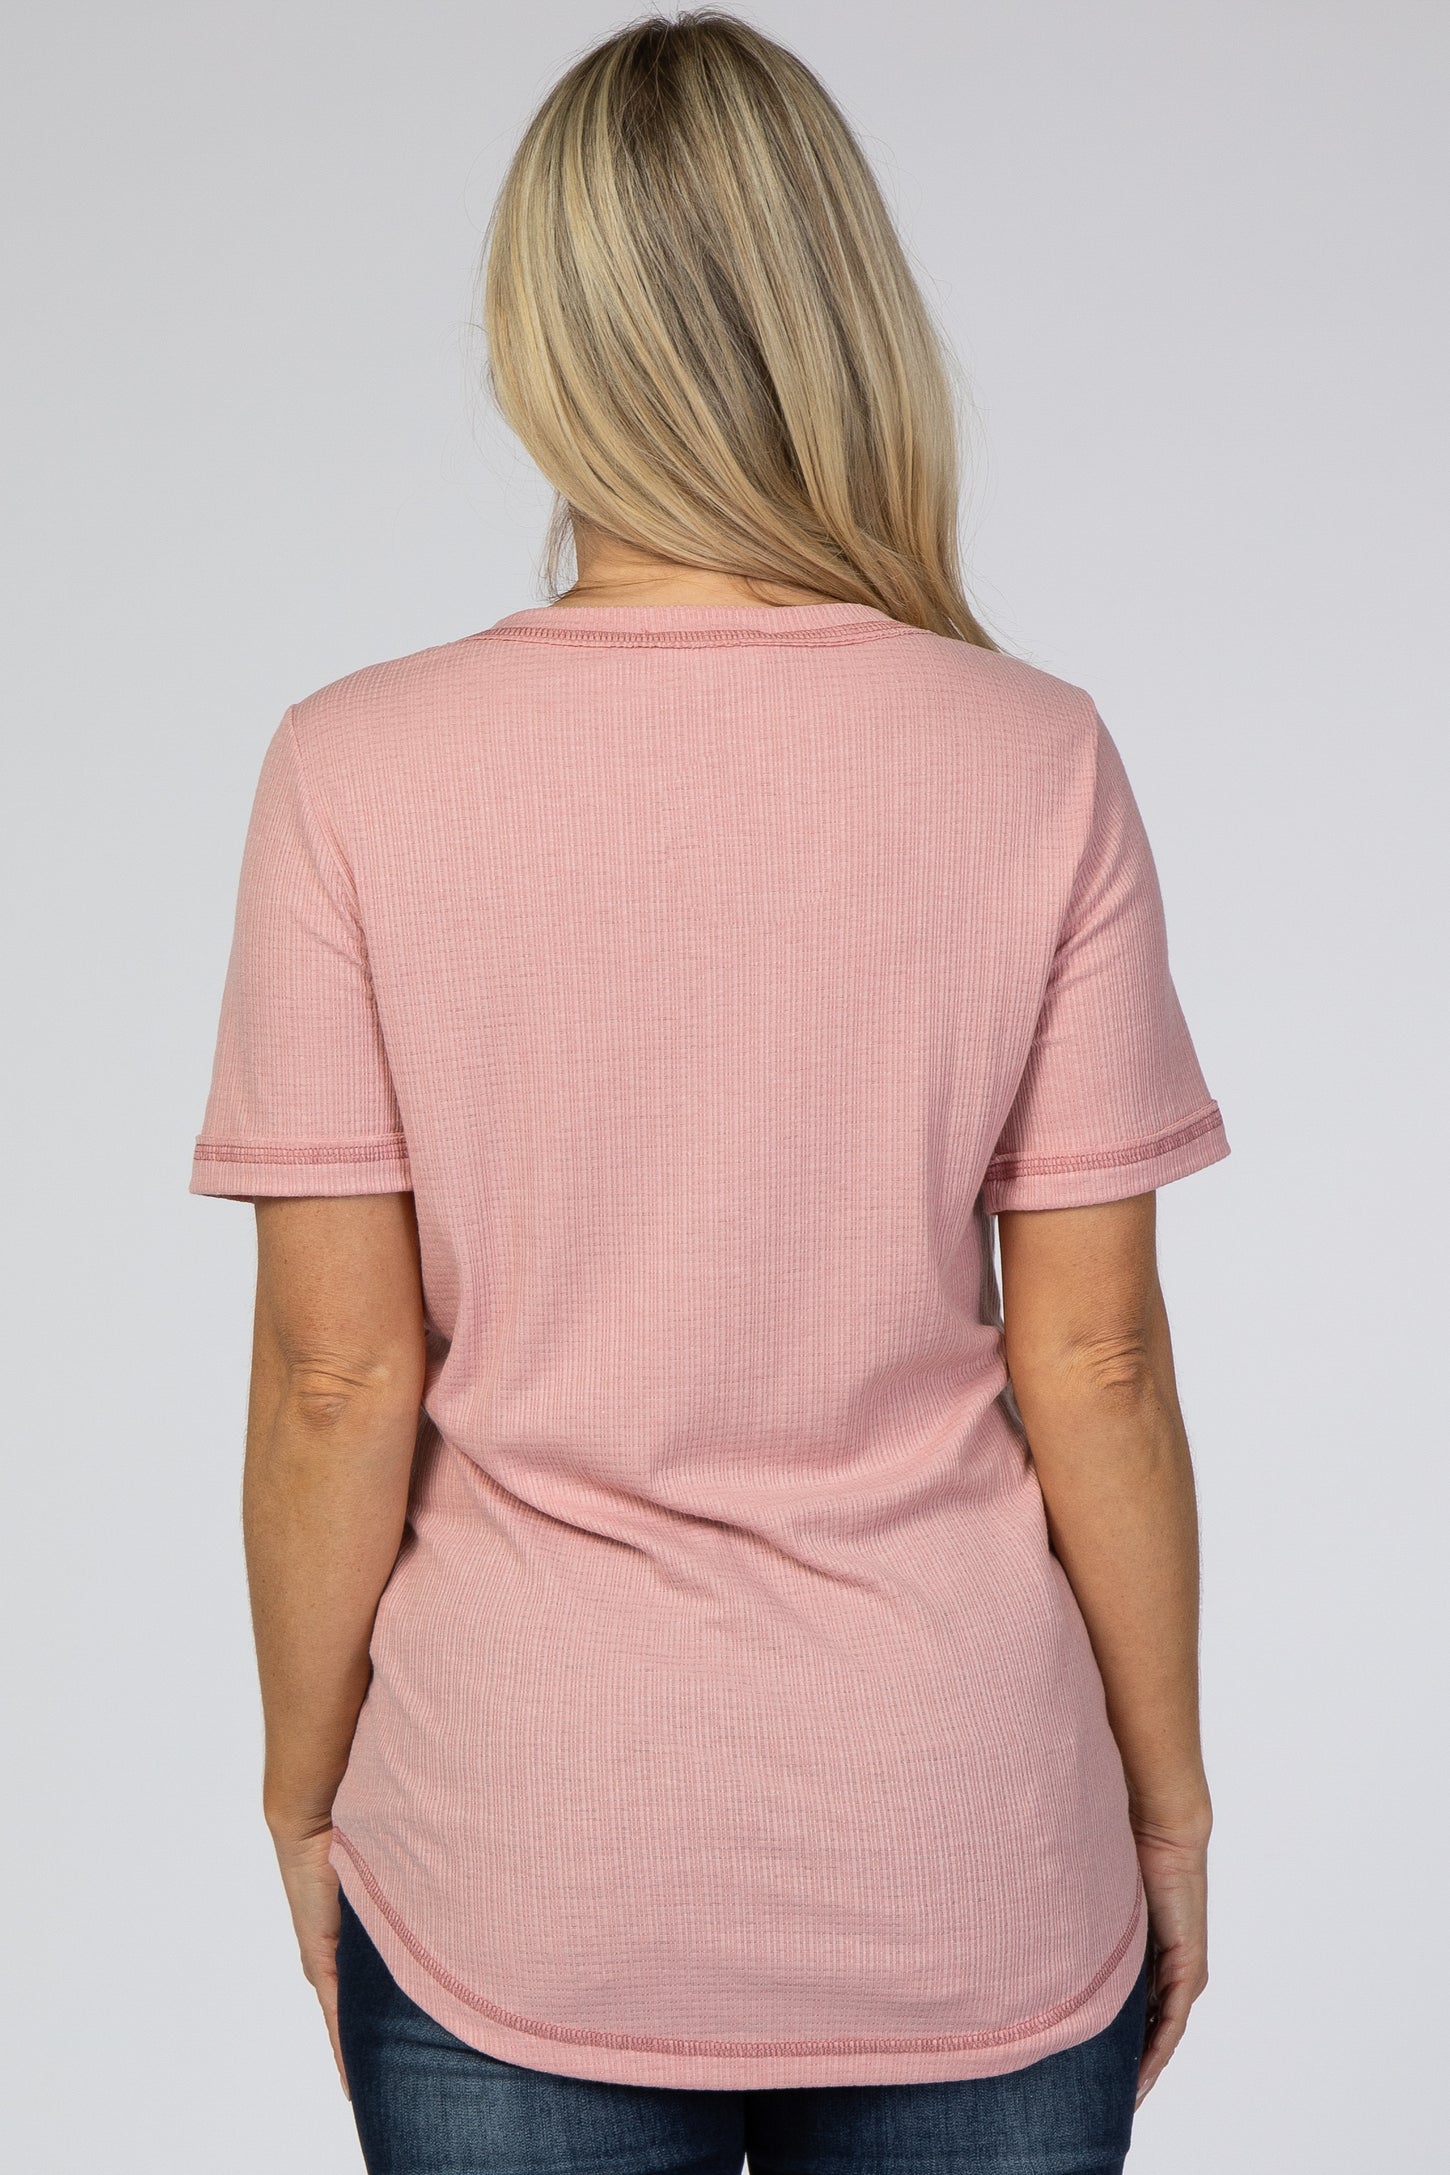 Pink Button Front Maternity T Shirt